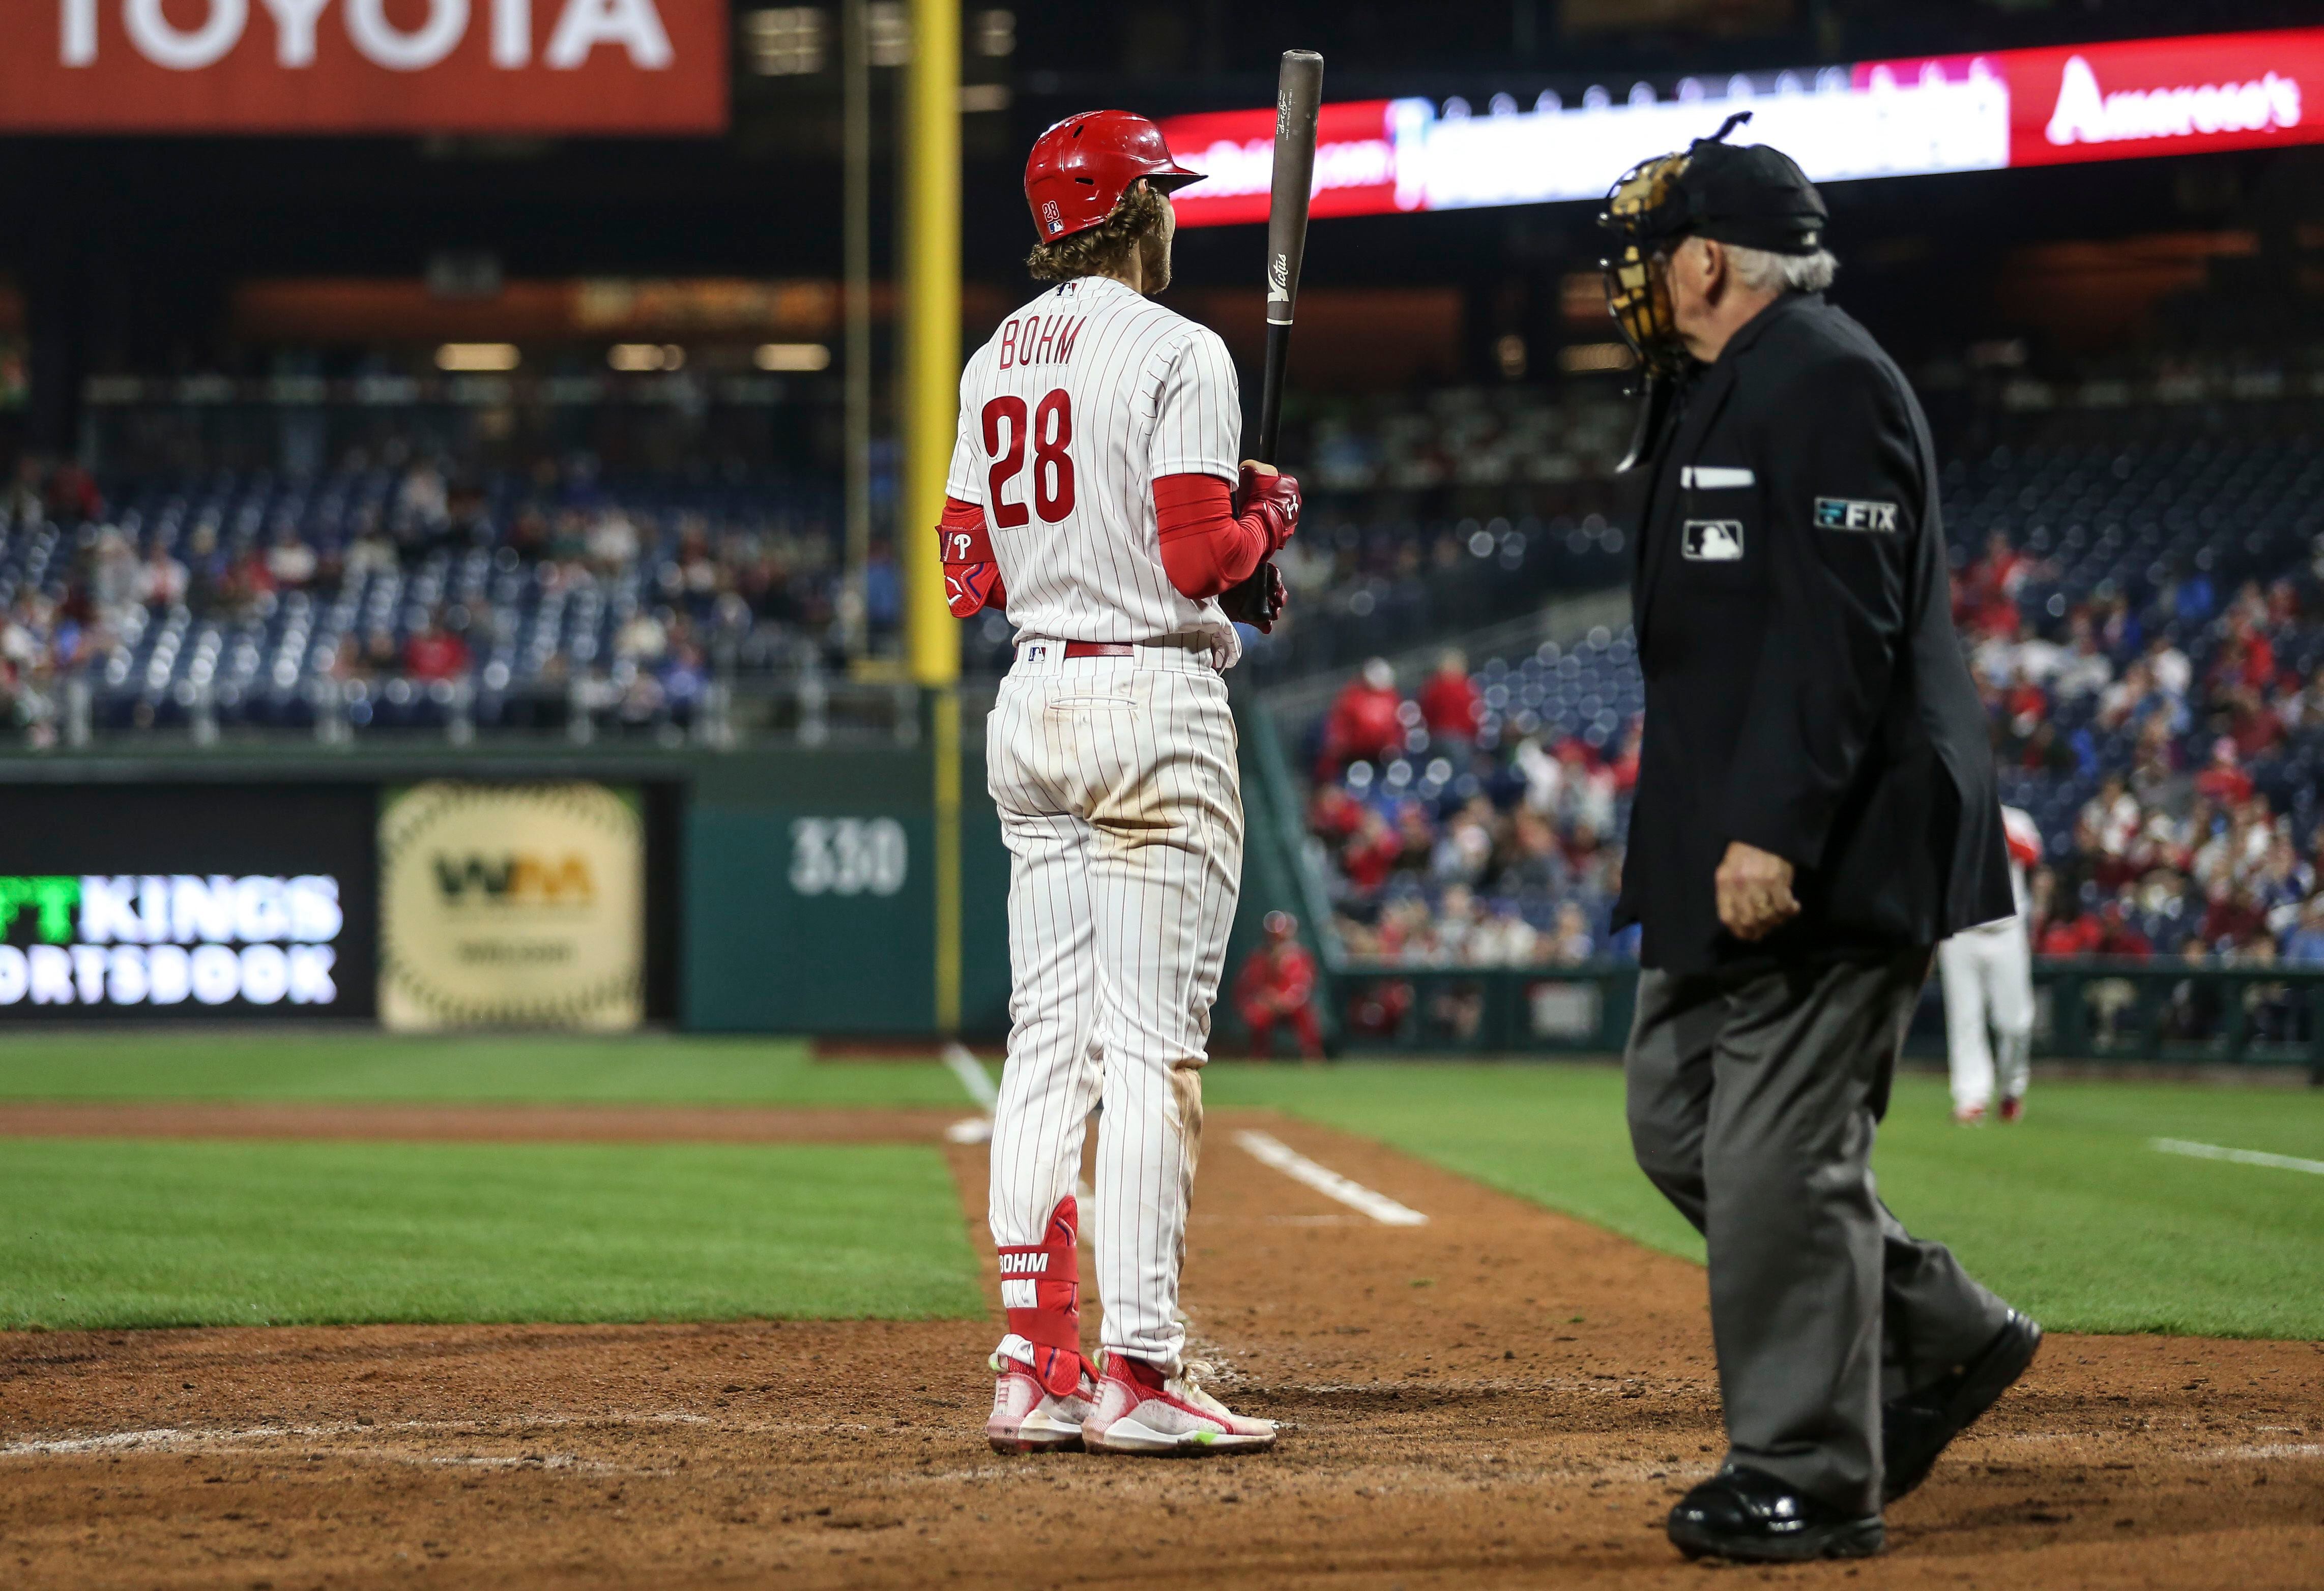 Phillies kick-off 2023 by blowing a 5-0 lead to the Rangers – NBC